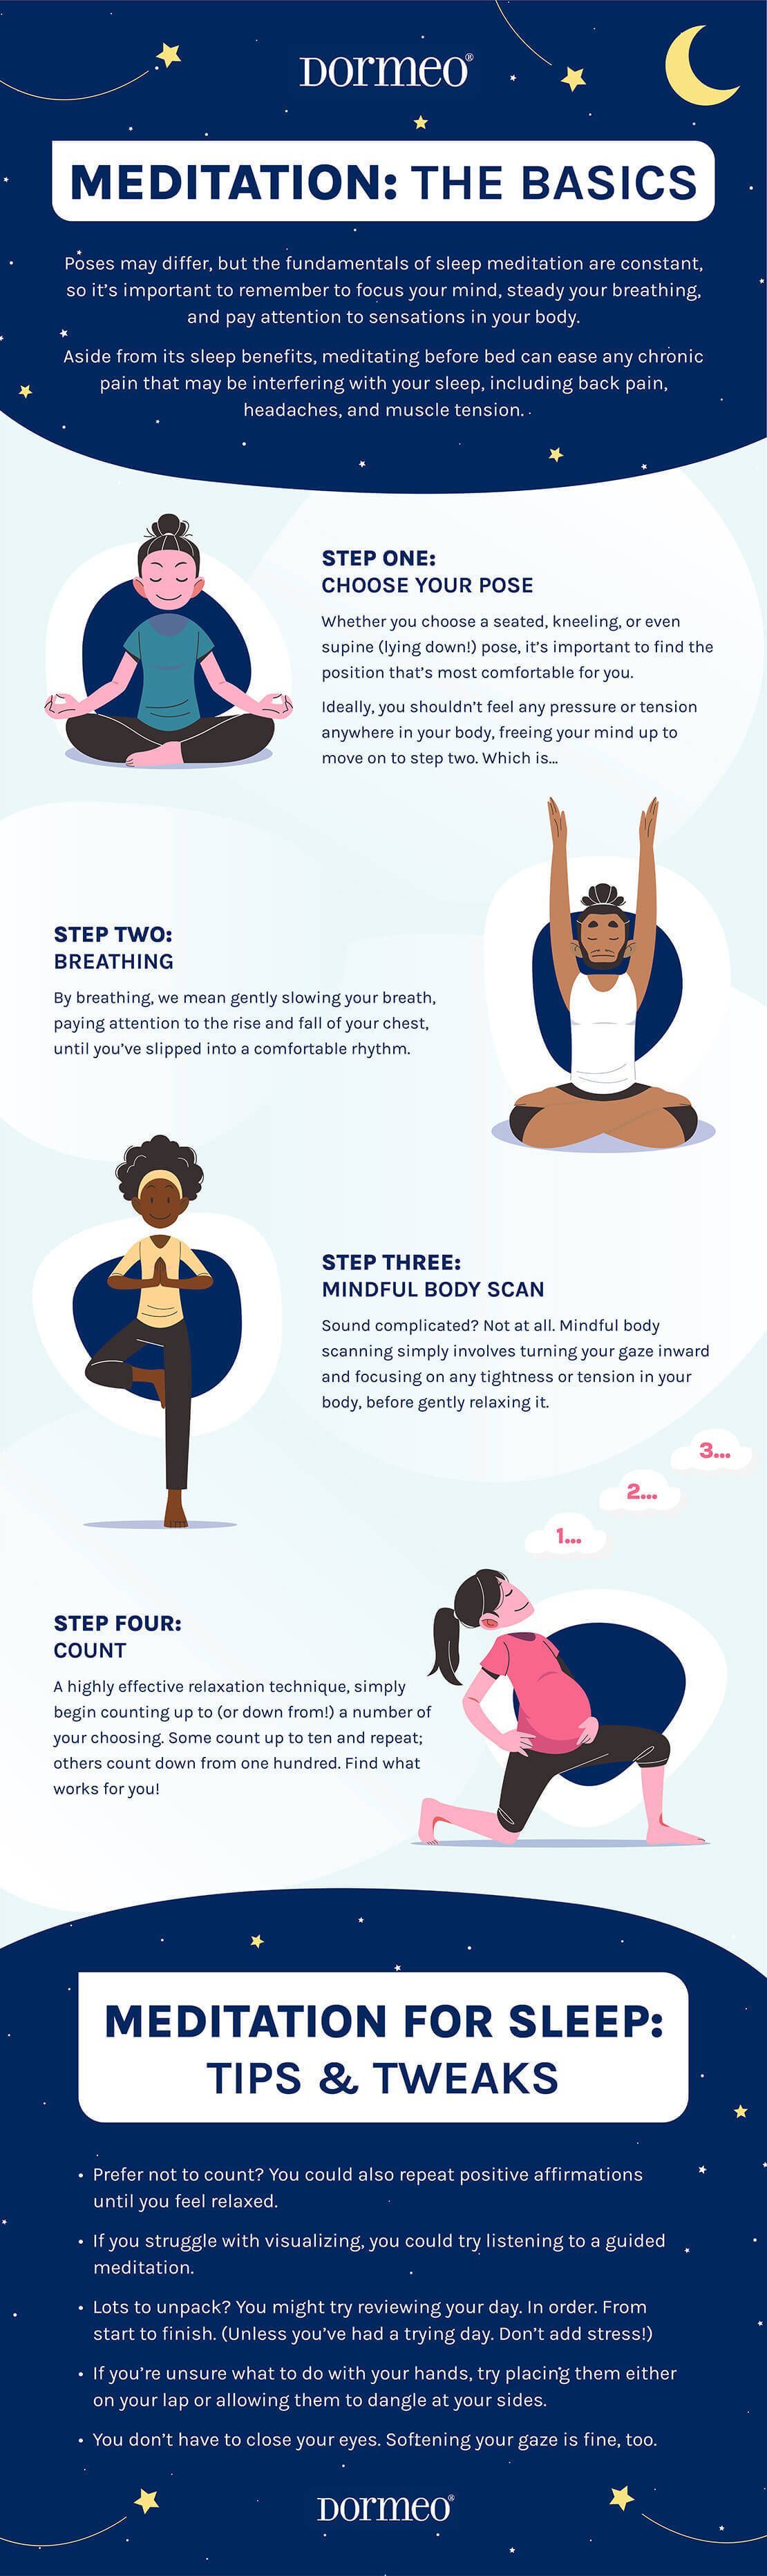 Four steps to meditation infographic